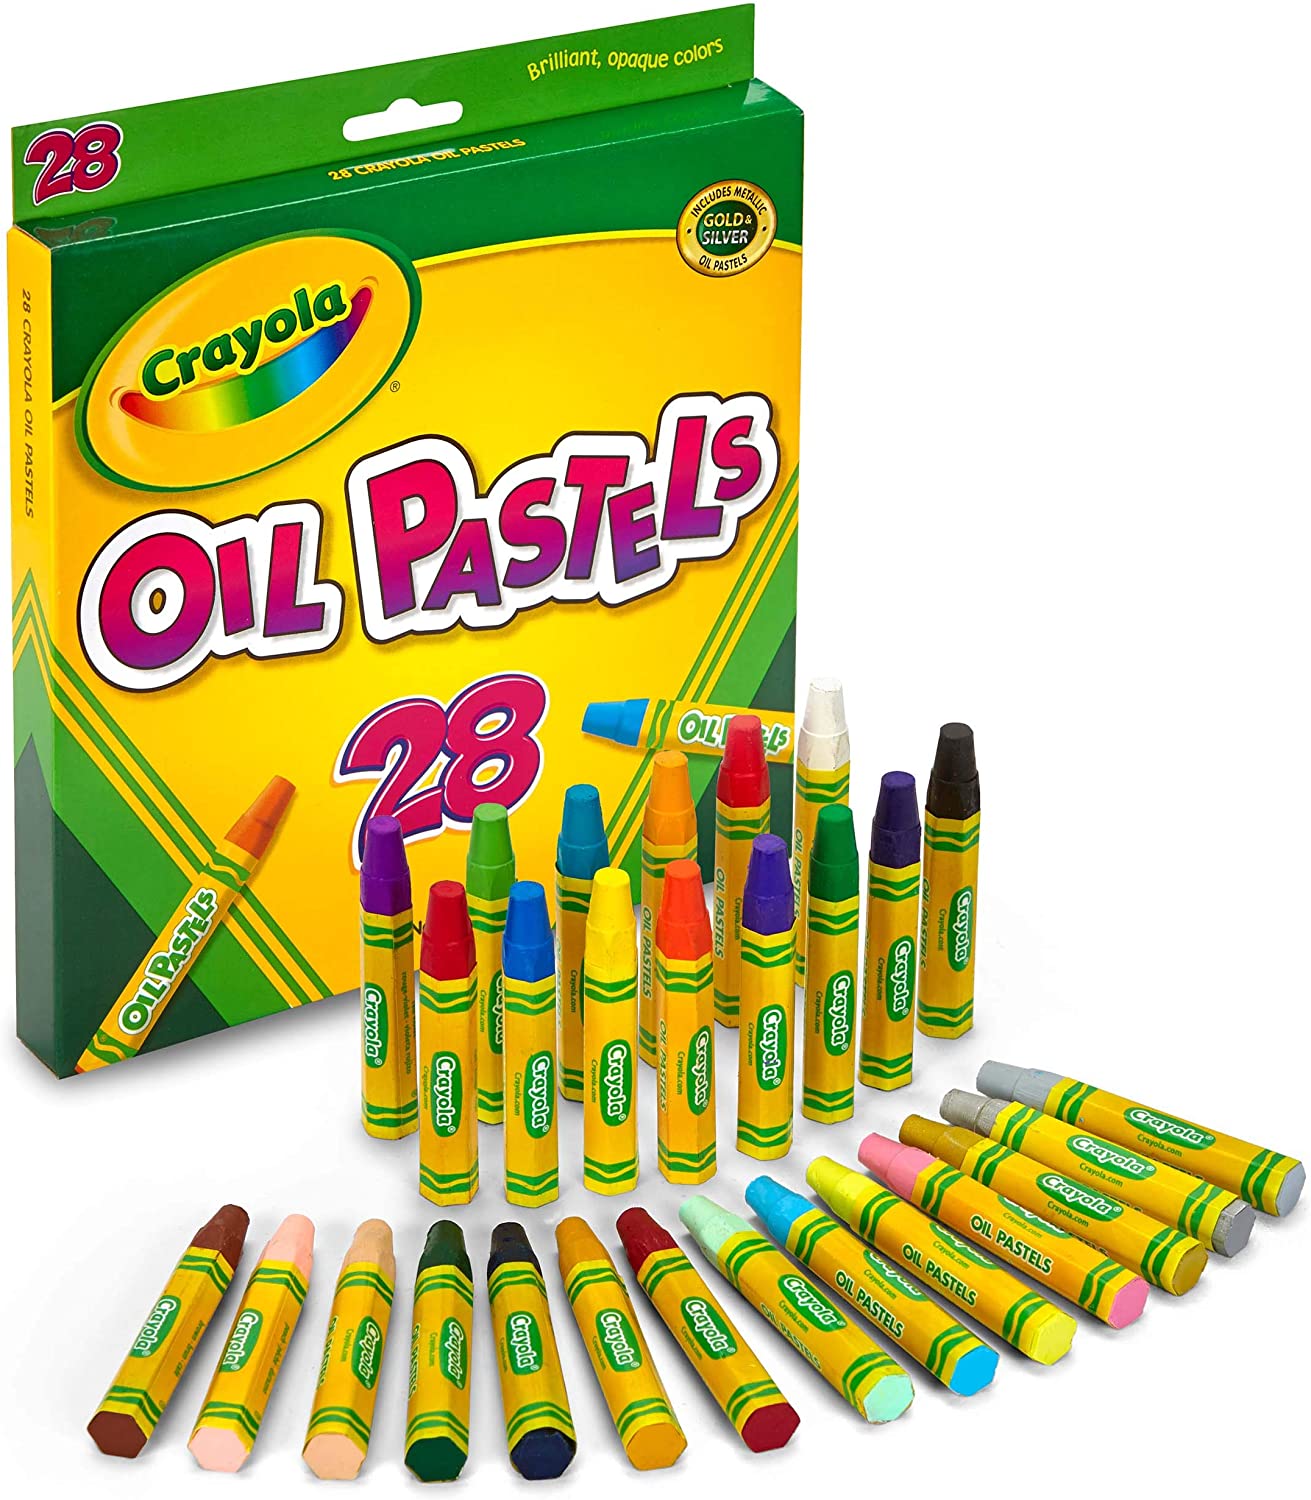 Crayola Oil Pastels - 28 Count